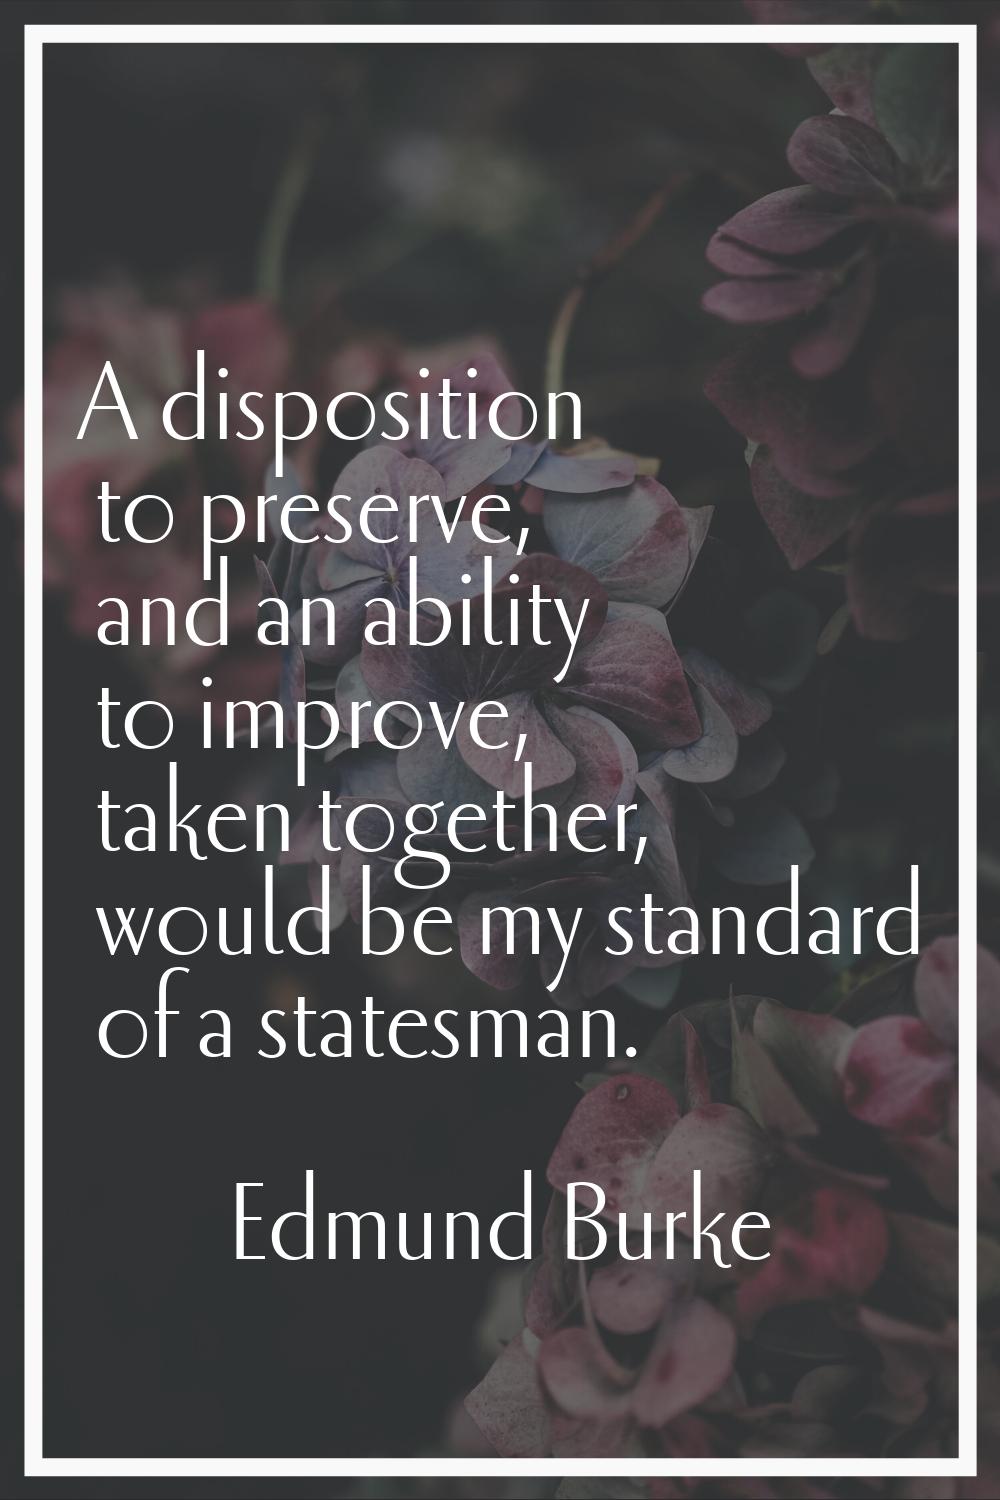 A disposition to preserve, and an ability to improve, taken together, would be my standard of a sta